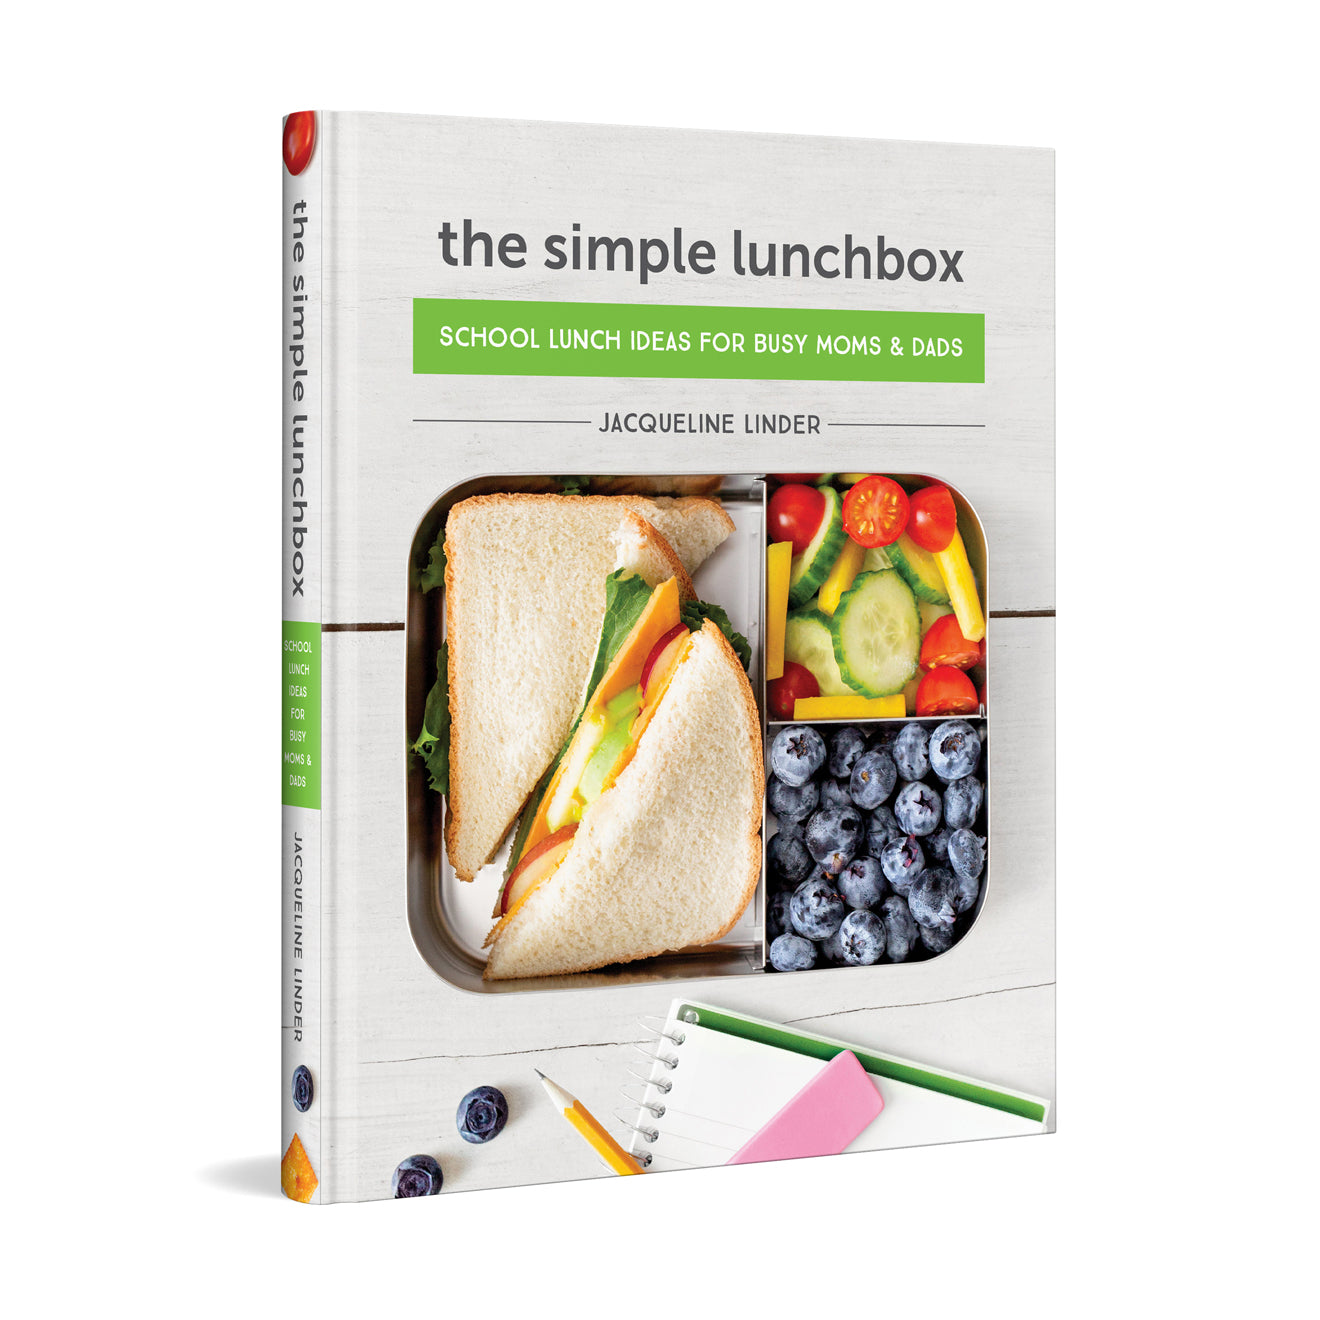 Quick and Easy Lunch Box Ideas